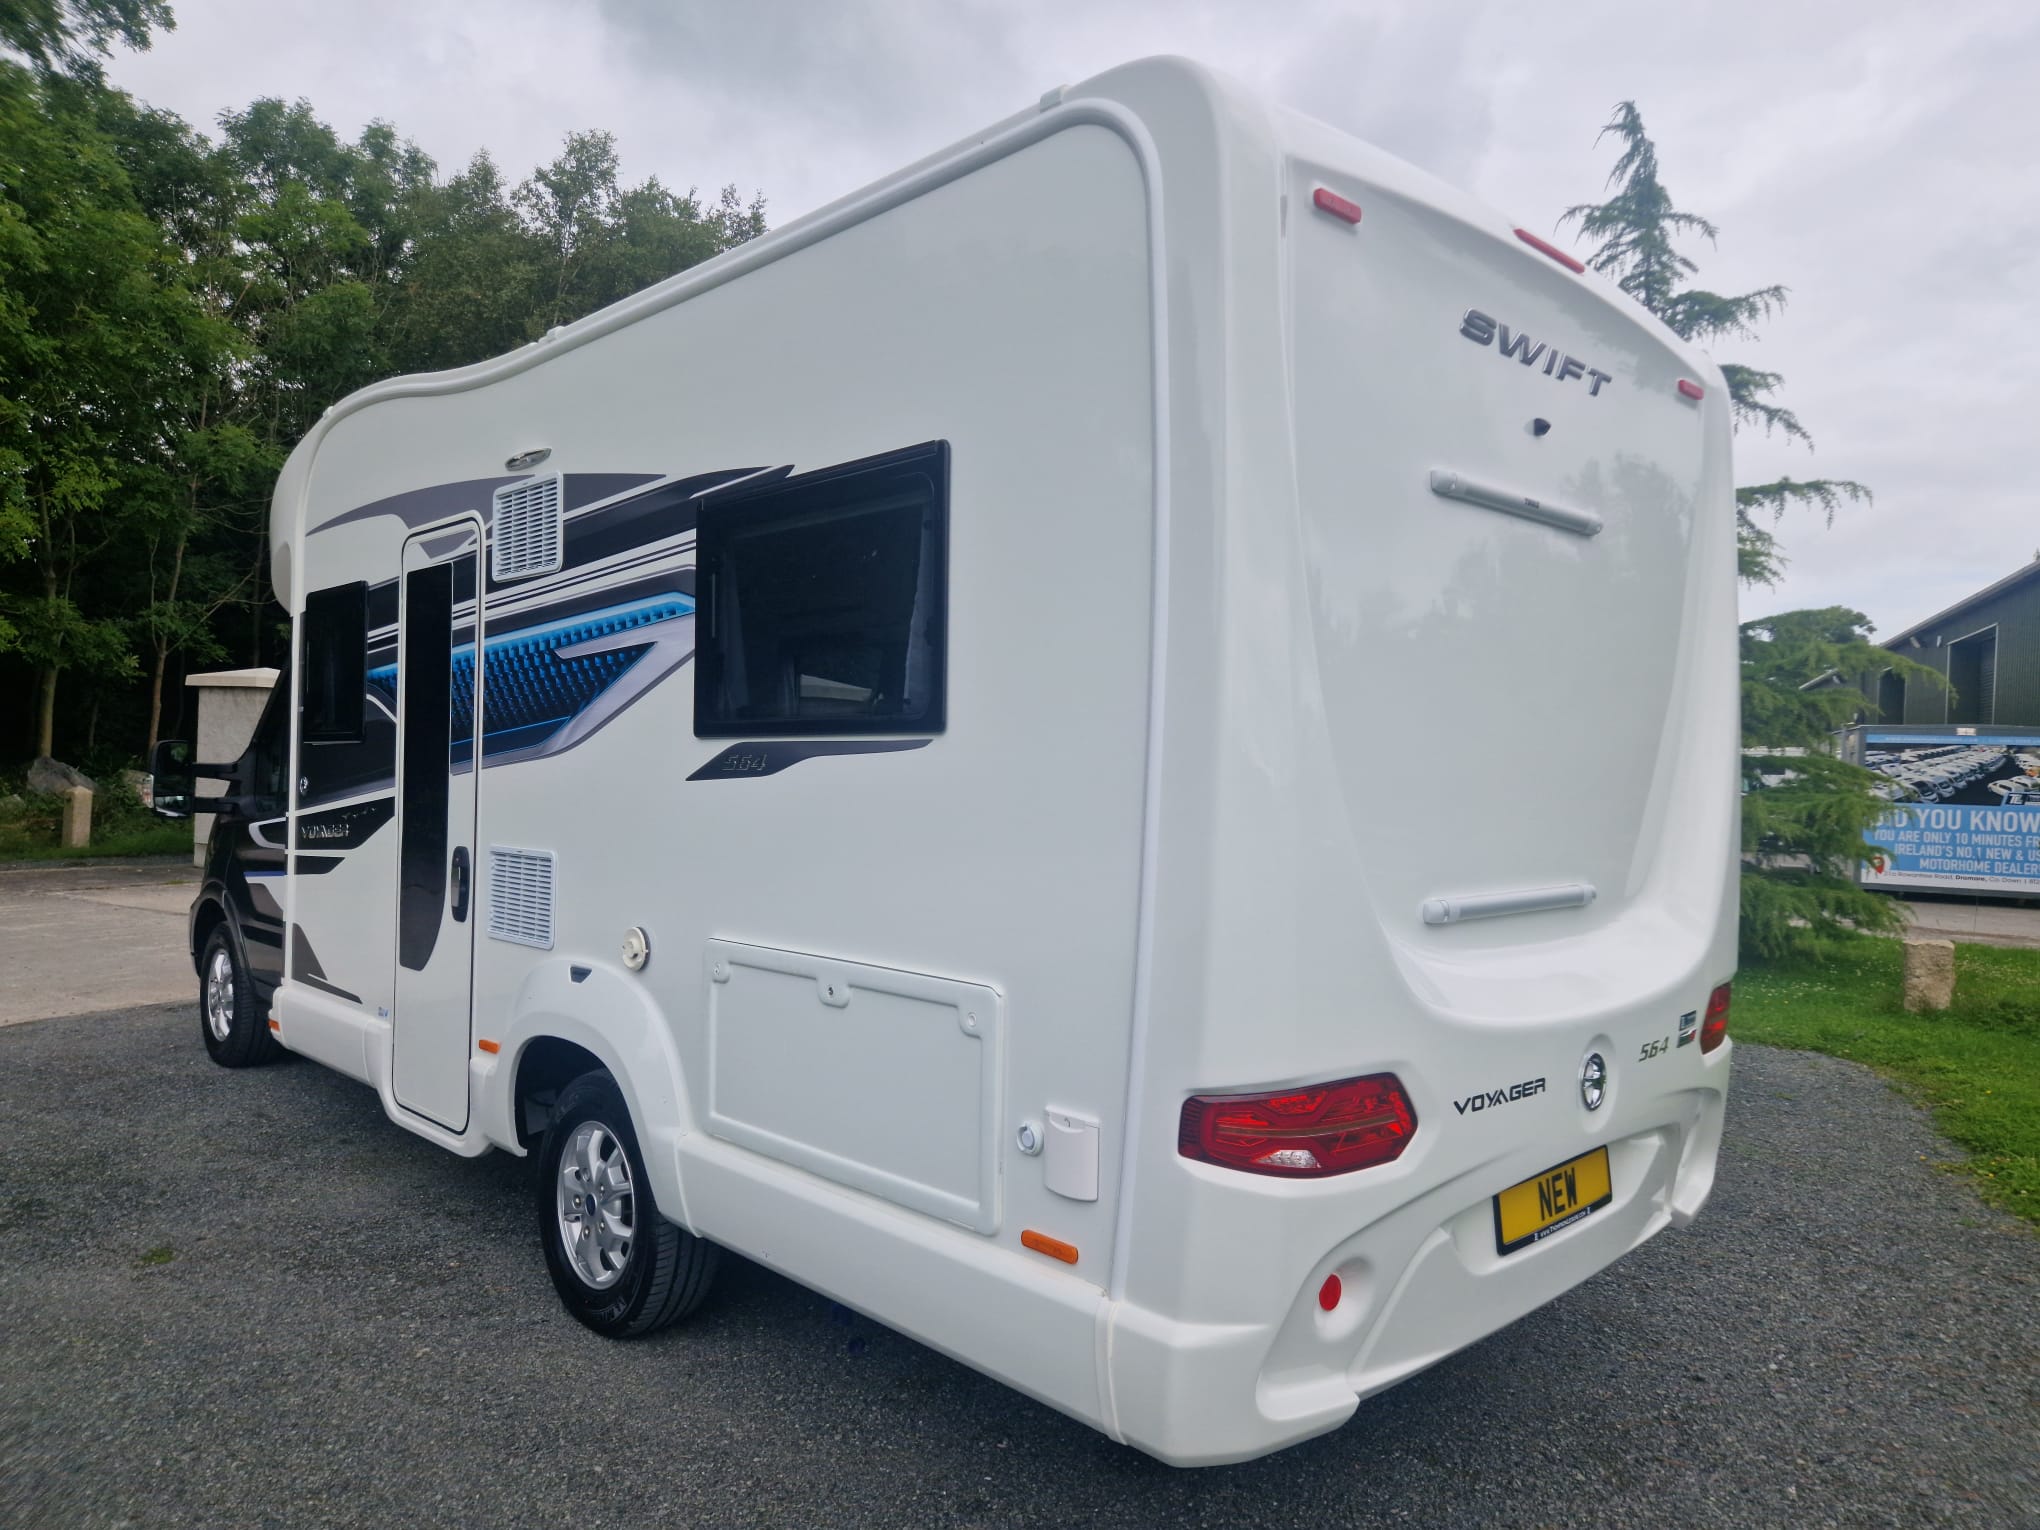 New Swift Voyager 564 - Automatic